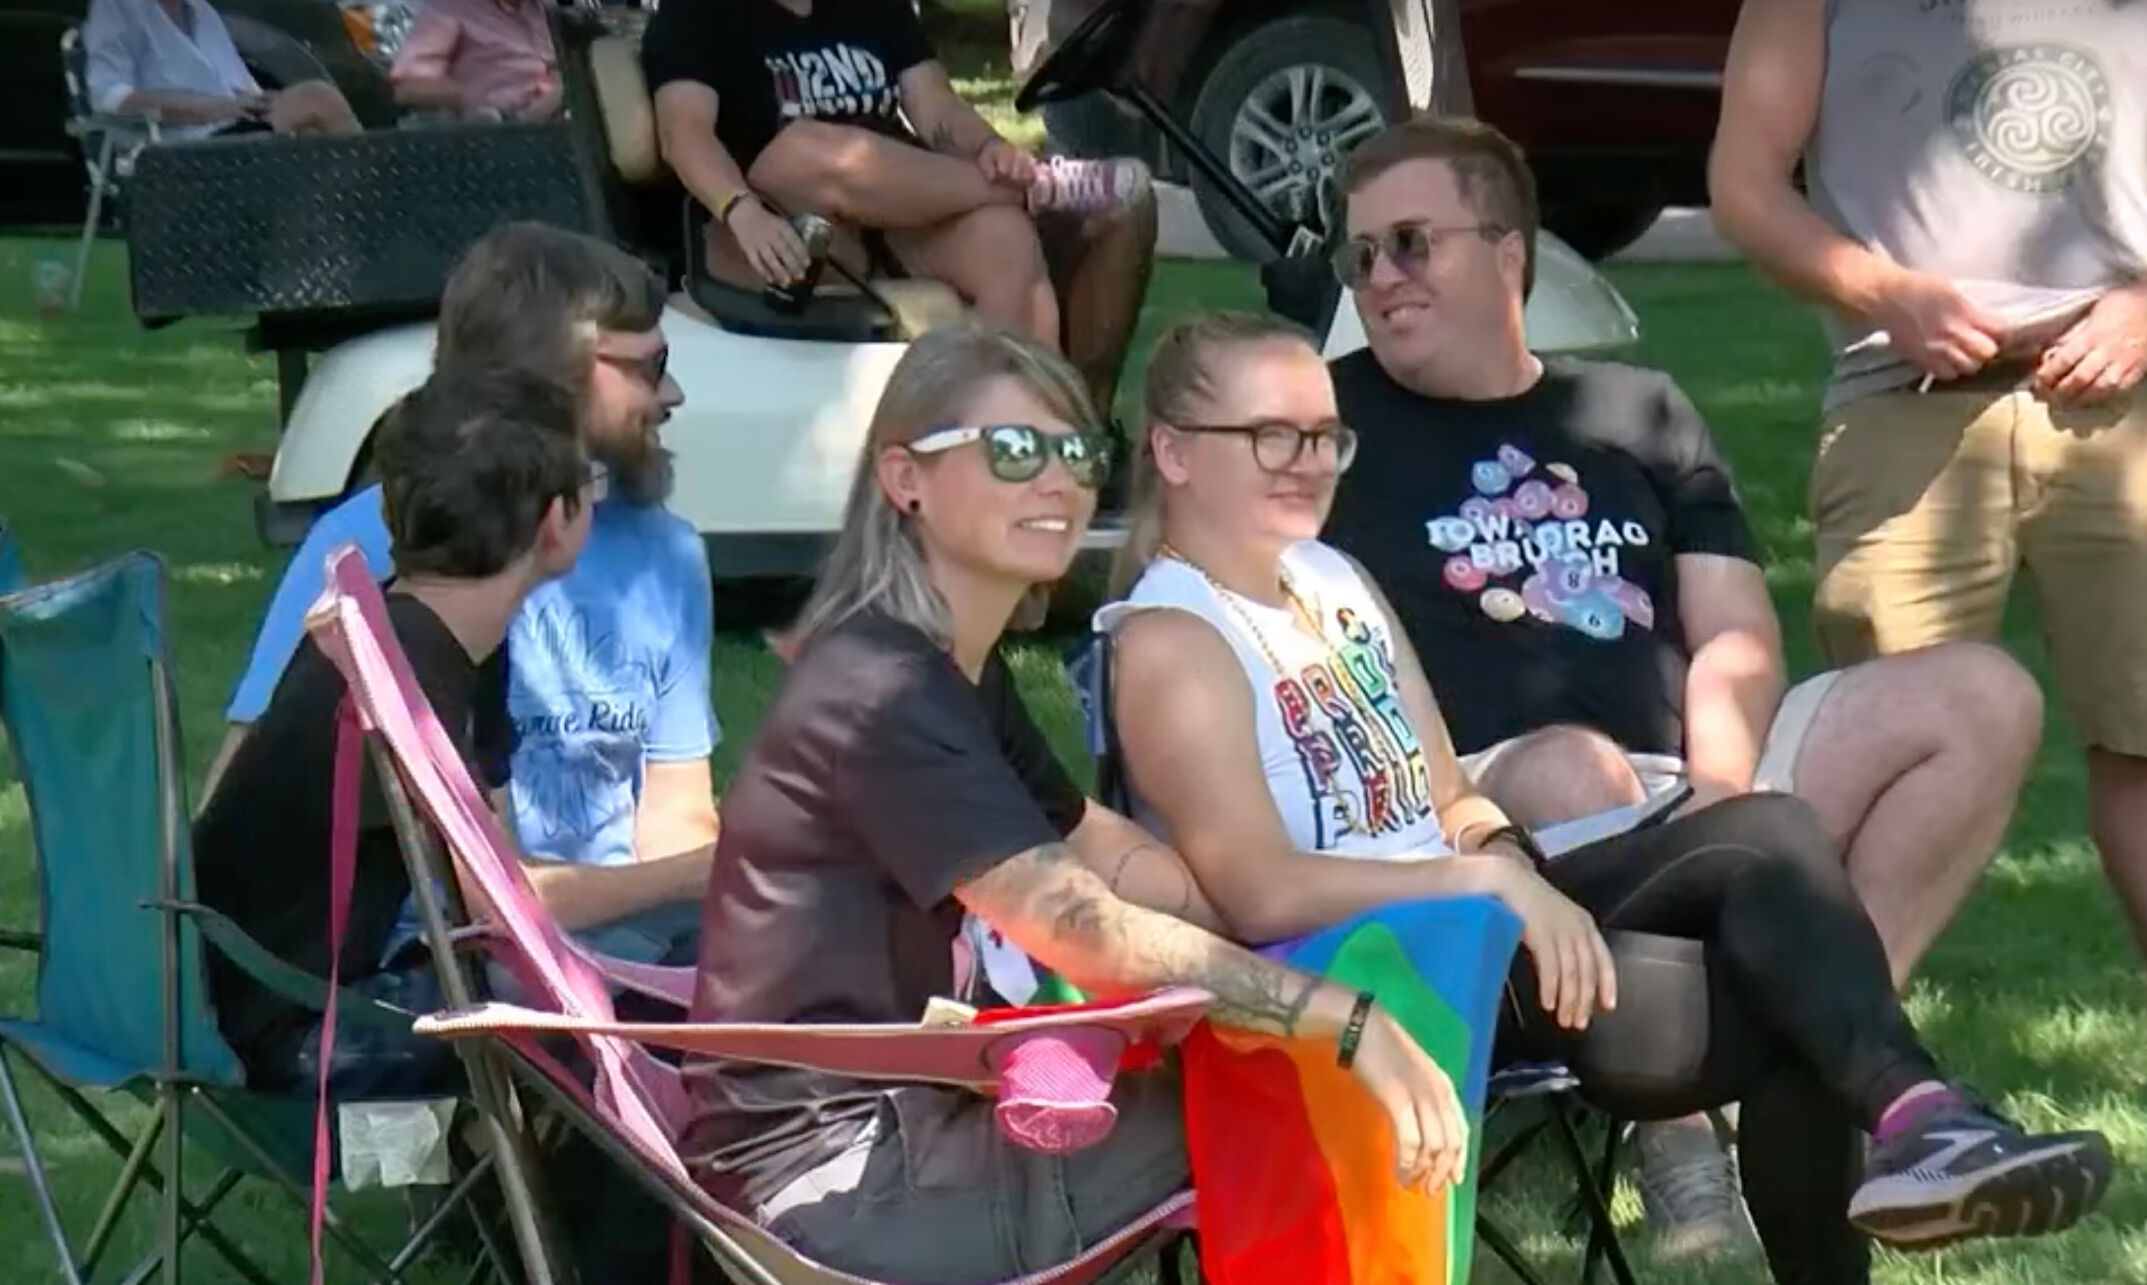 Members of Shenandoah Pride watch the Labor Day parade in Essex, Iowa.